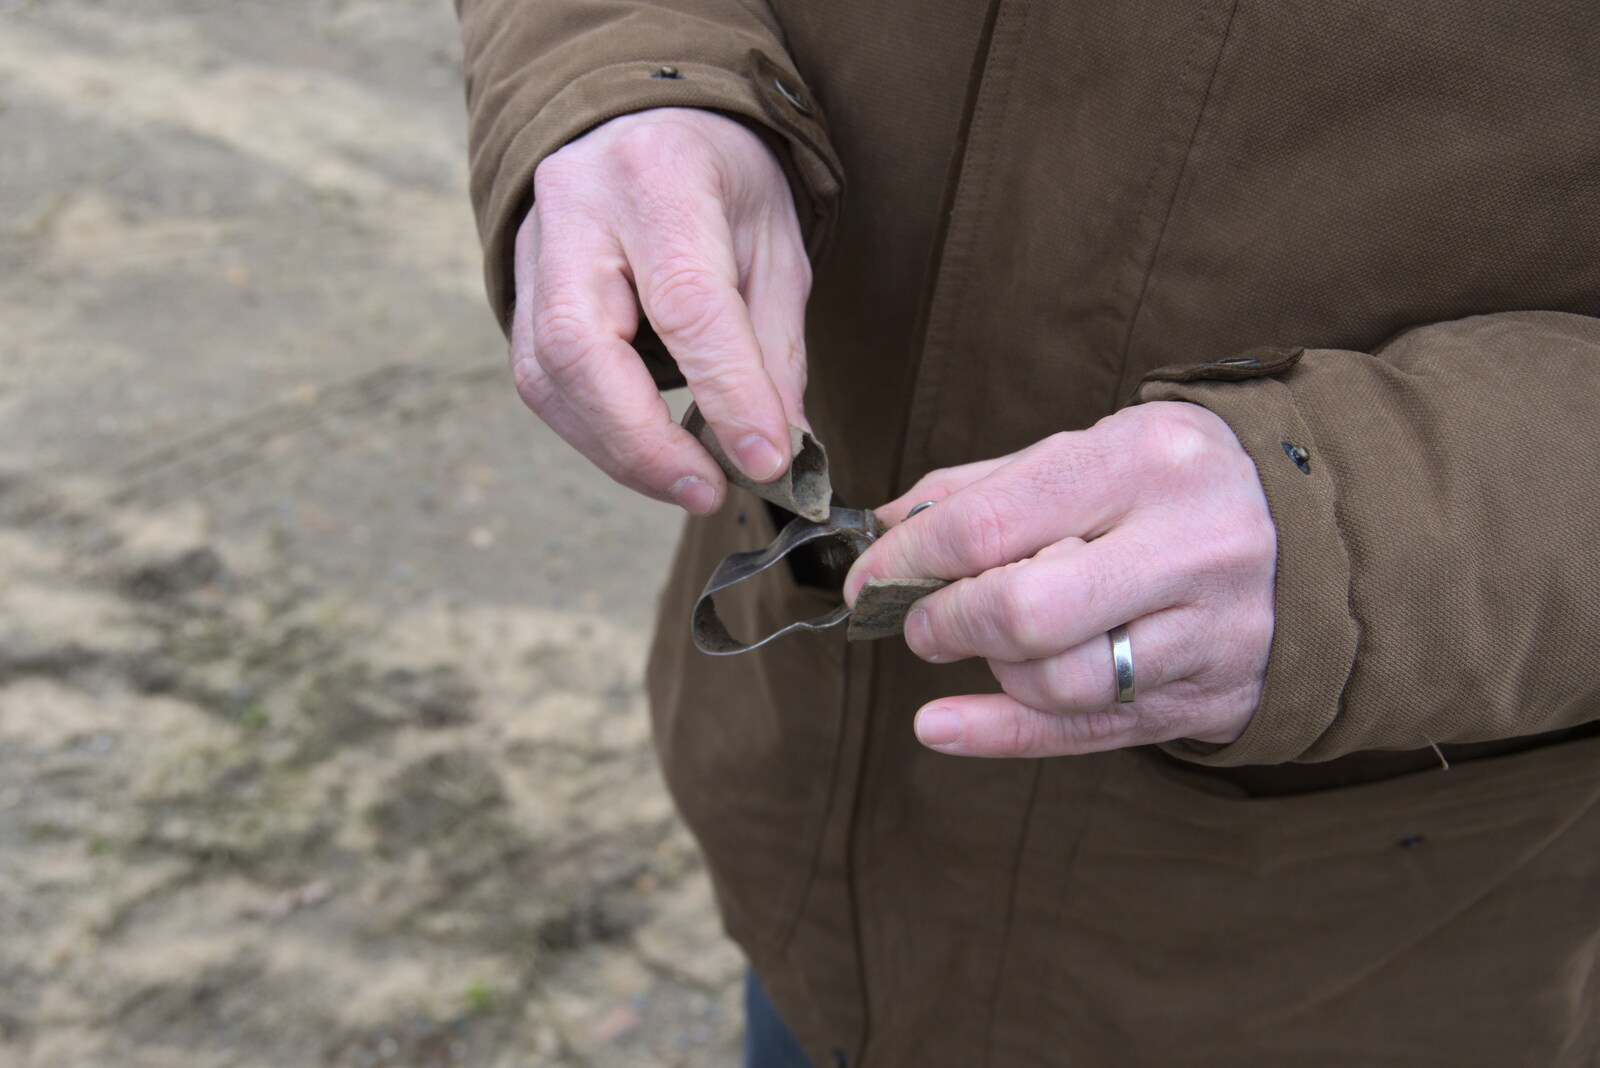 The Detectorists, and a Trip to the Market, Norwich - 25th February 2023: Clive finds a stainless steel clip from the plane